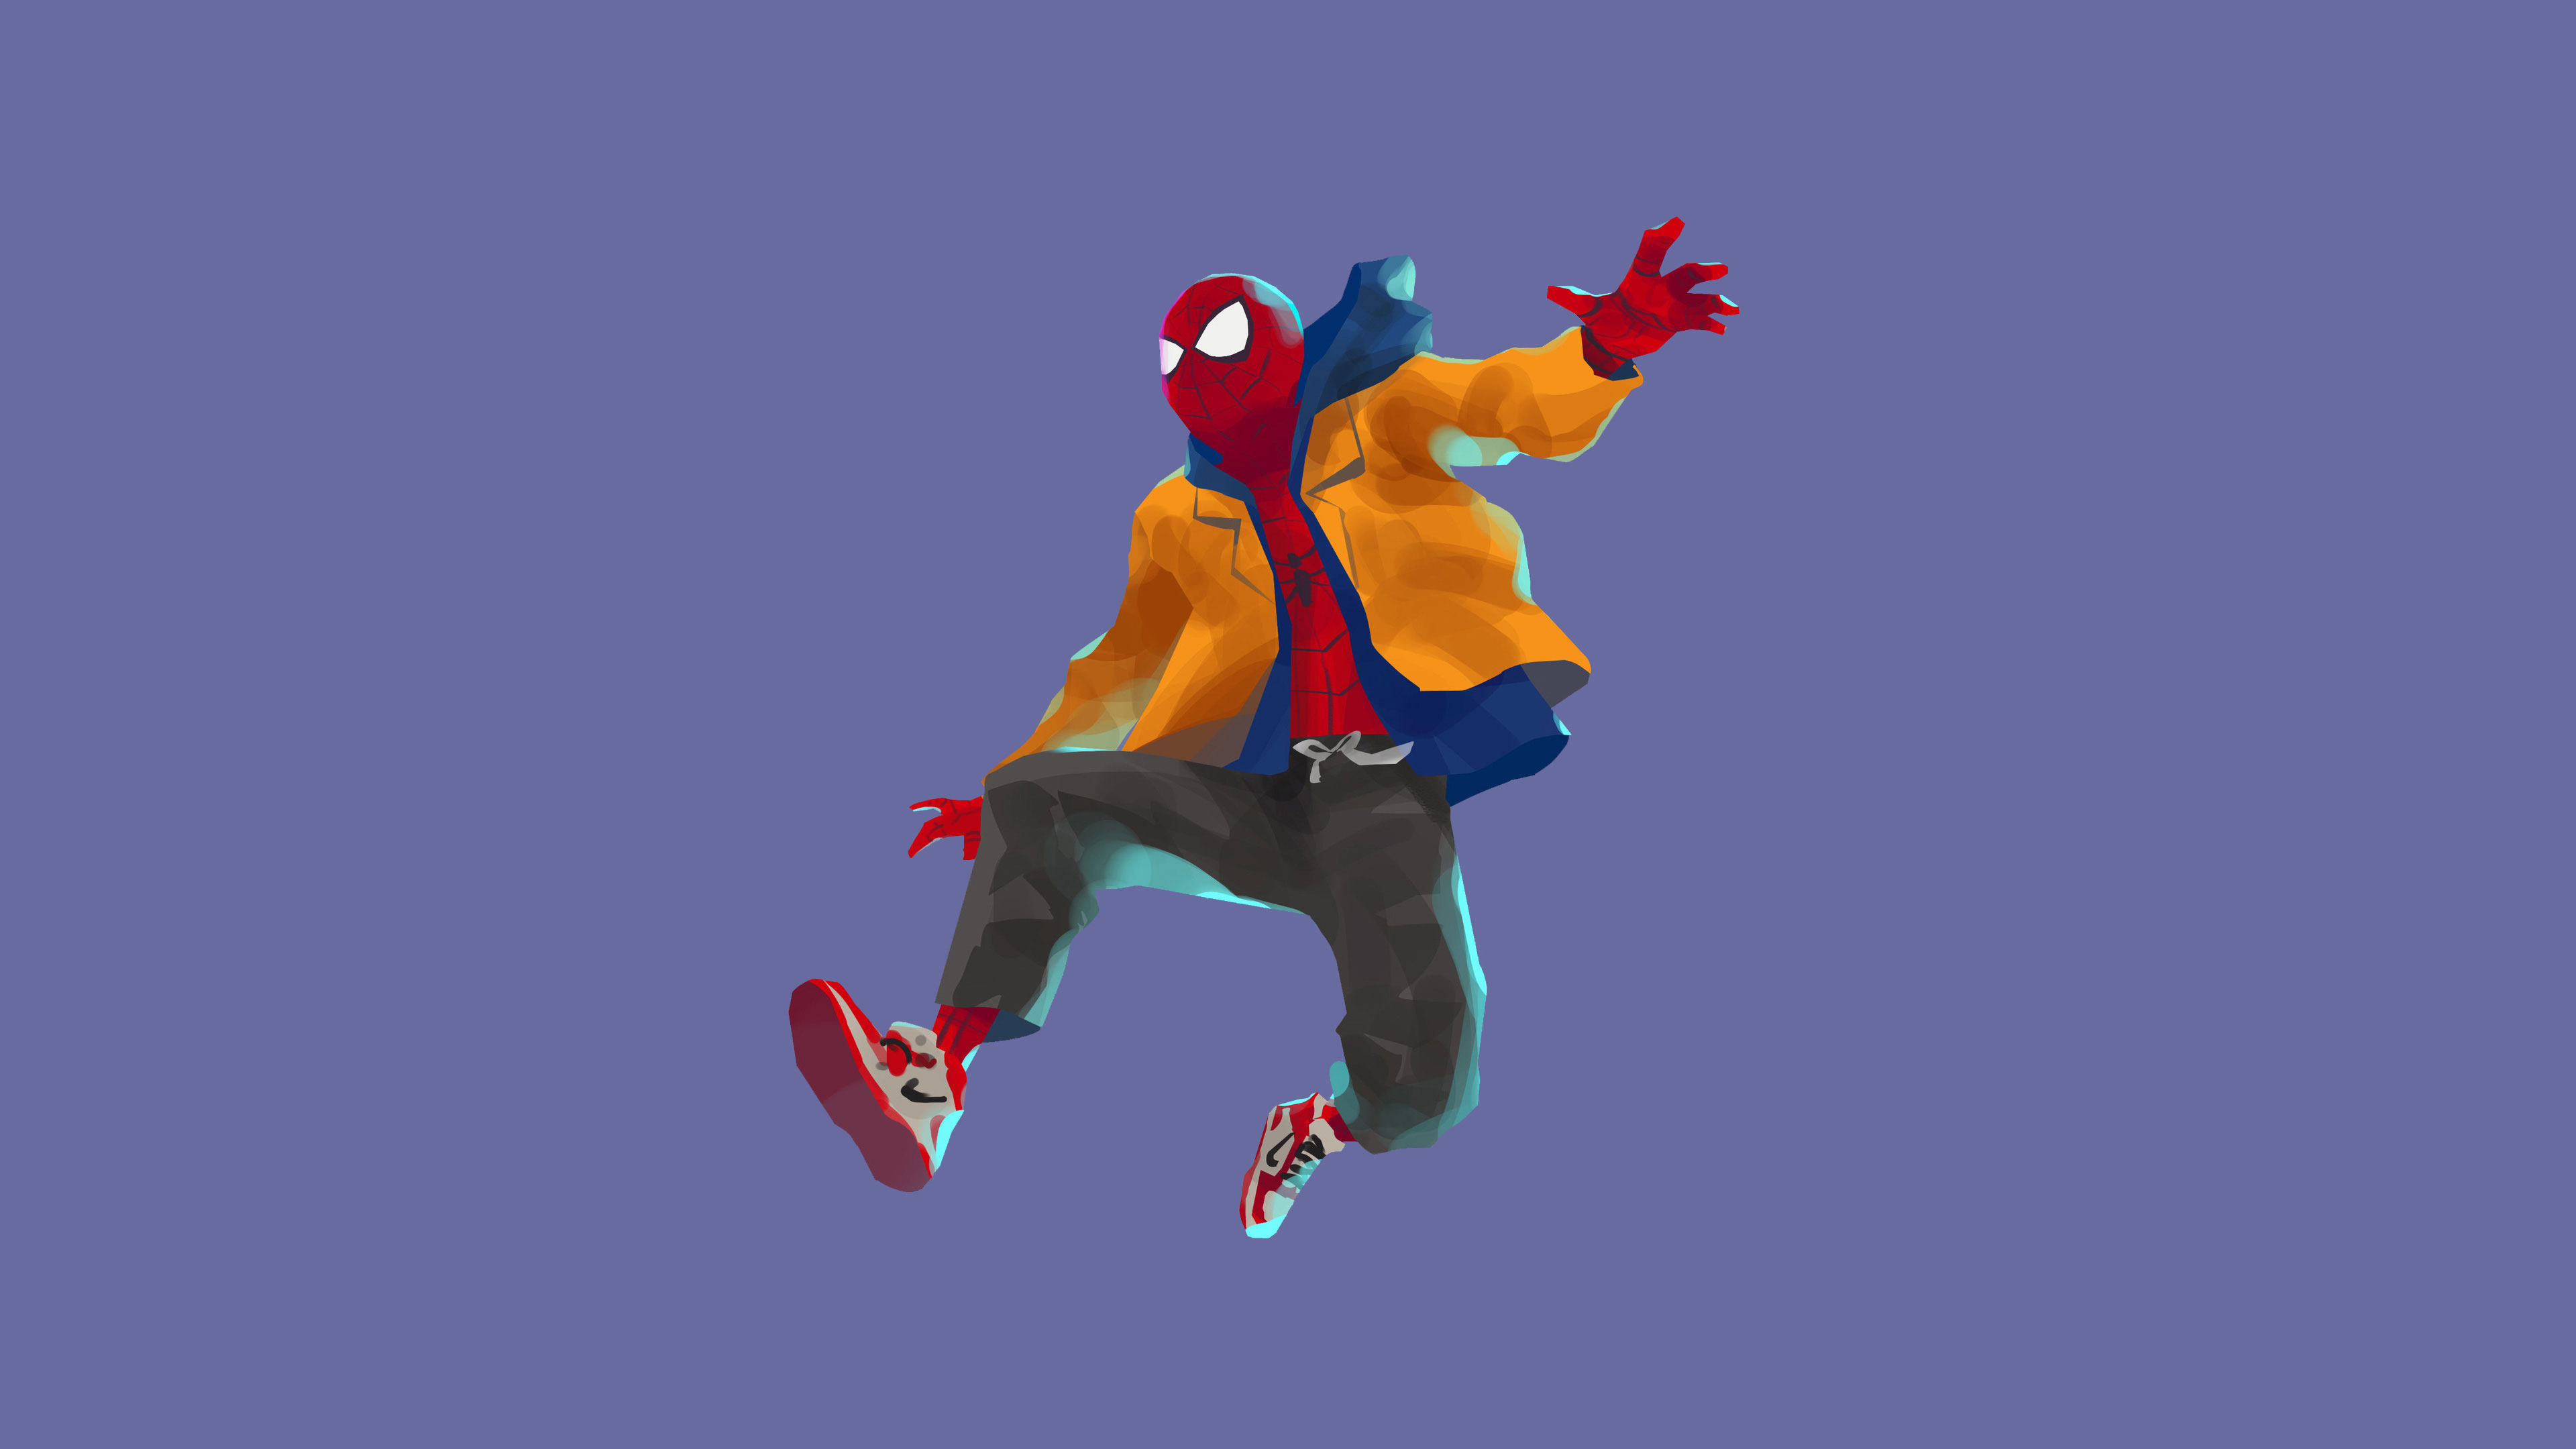 Wallpaper Spiderman Into The Spider Verse, 2018 Movies, 4k, 2018 Movies, Movies